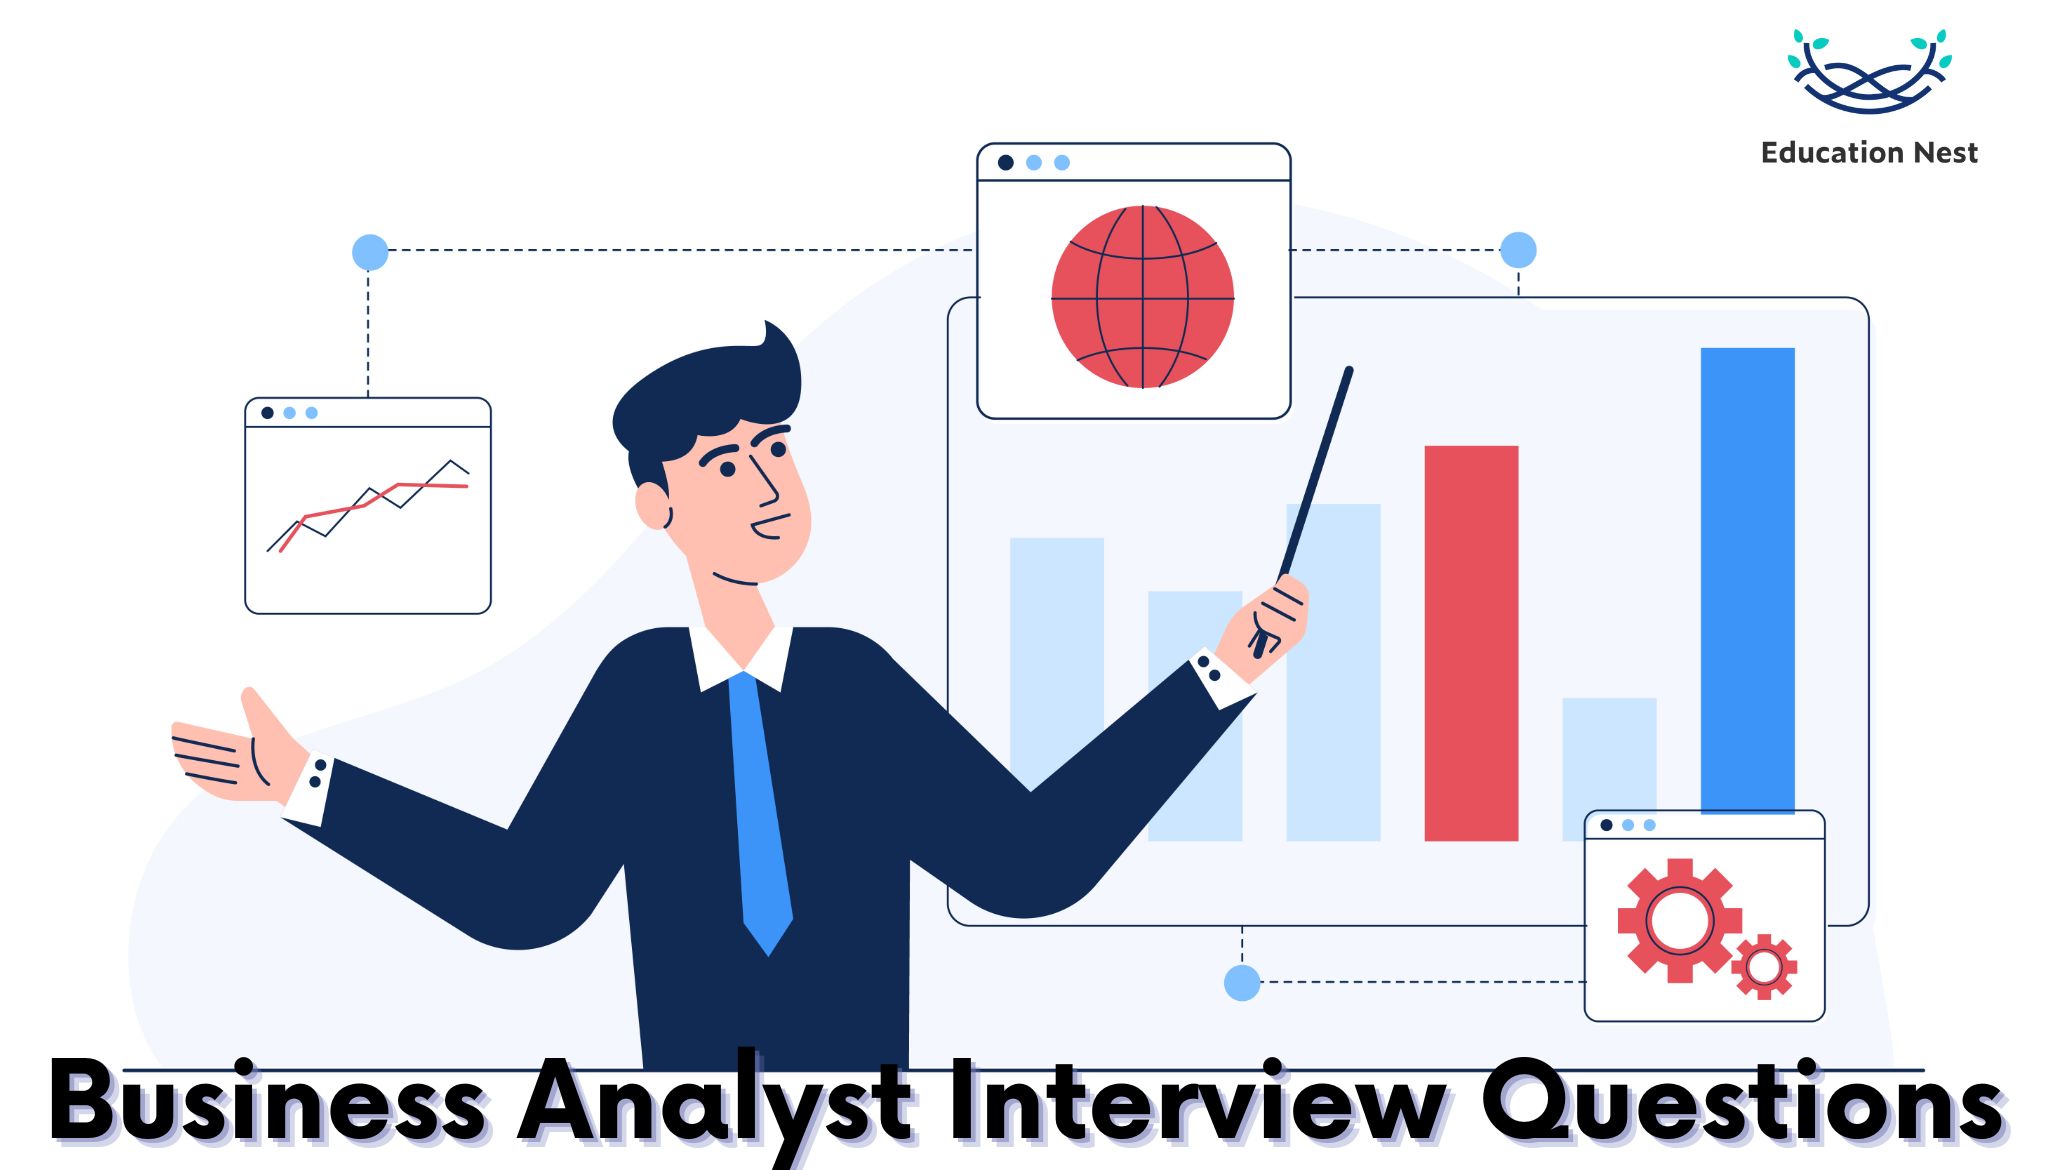 Business analyst interview questions